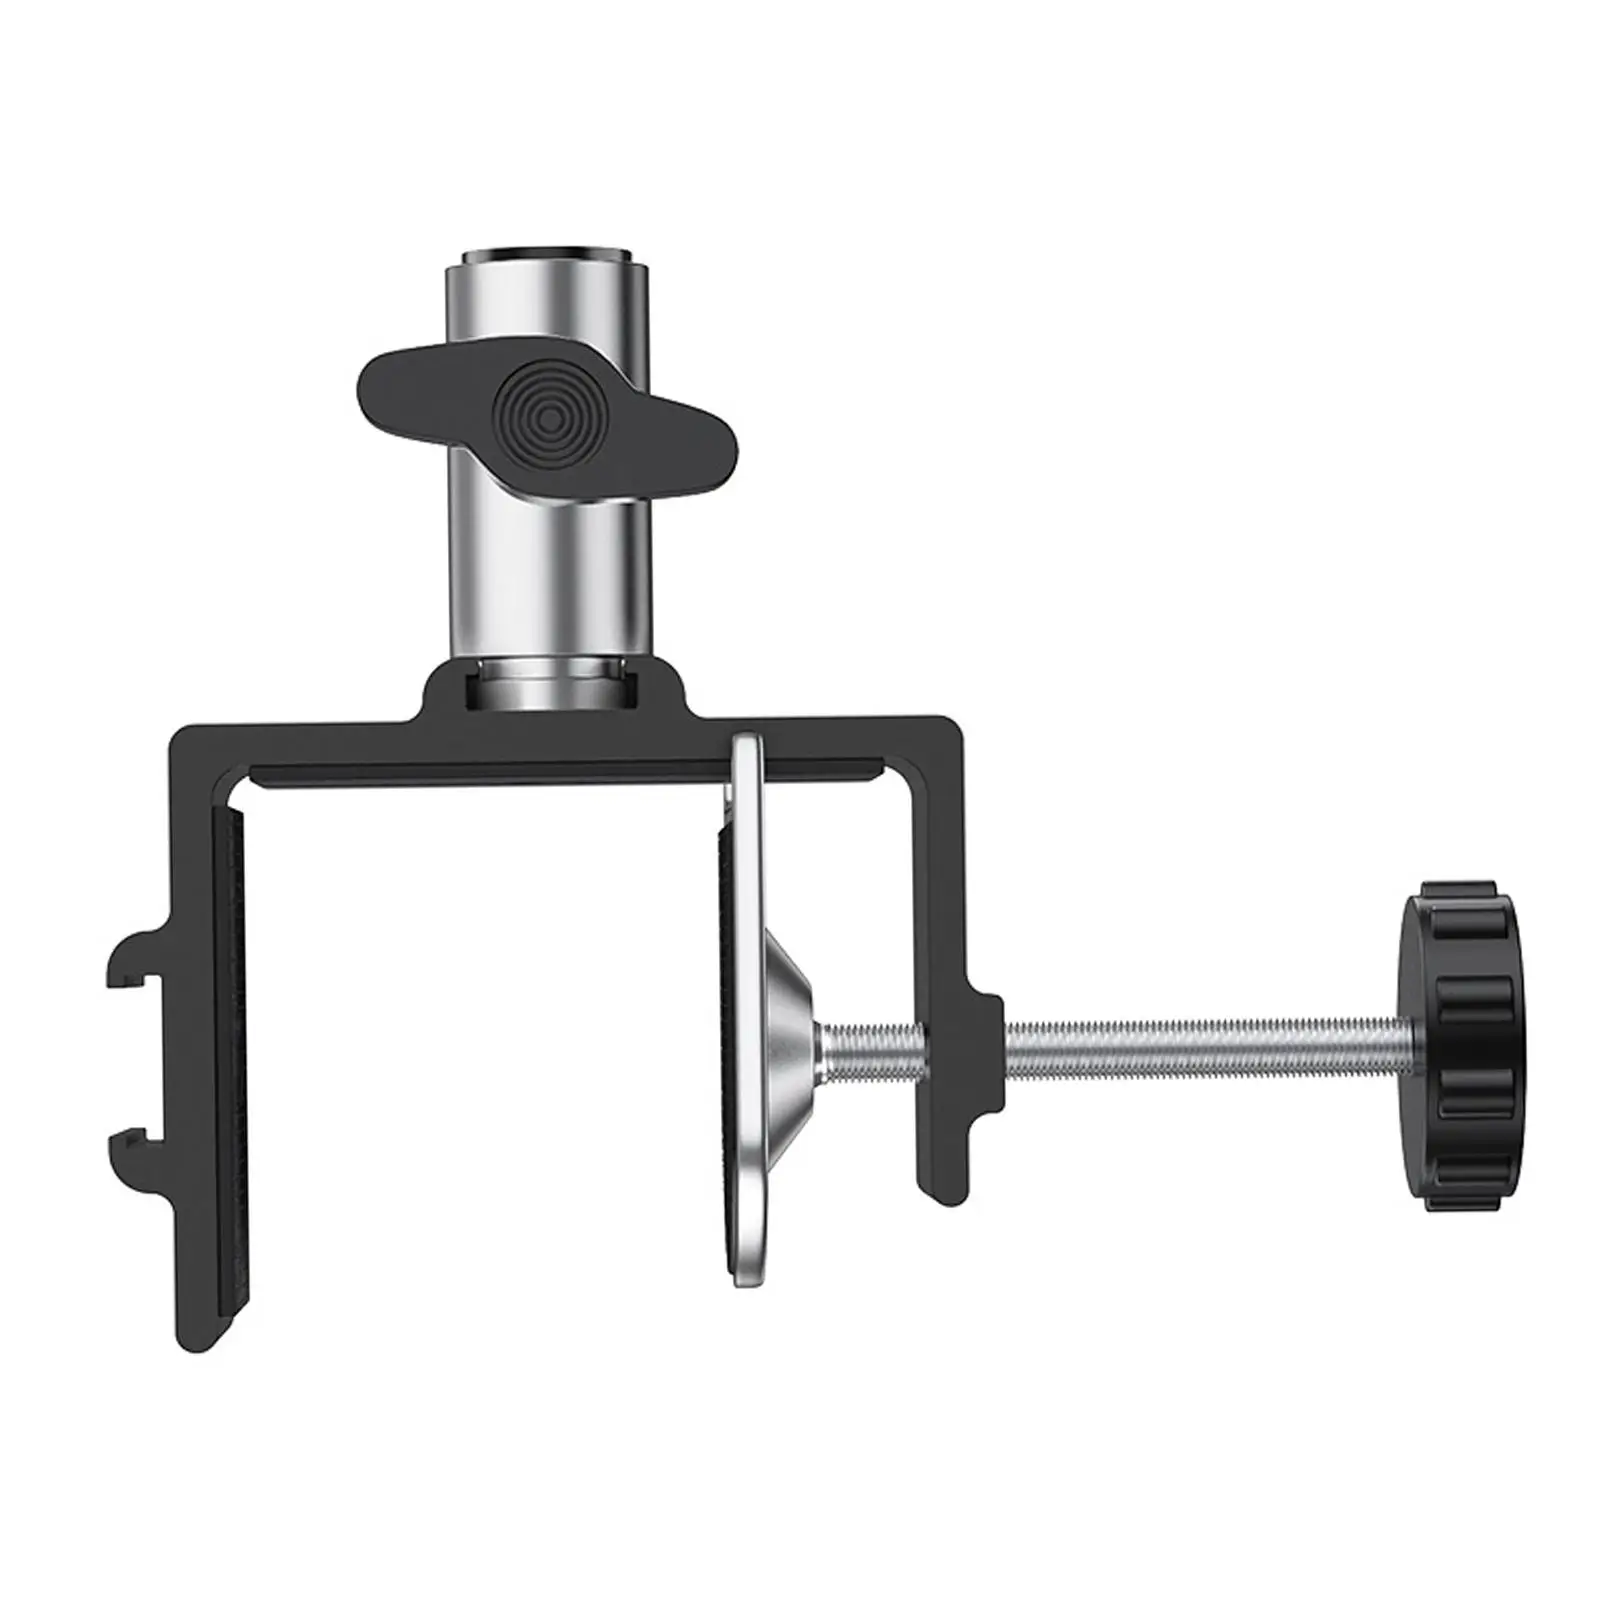 Desktop Mount Clamp Heavy Duty Detachable Easy to Clip Metal Holder for Stand-Working Speeches Reading Recording Presentation